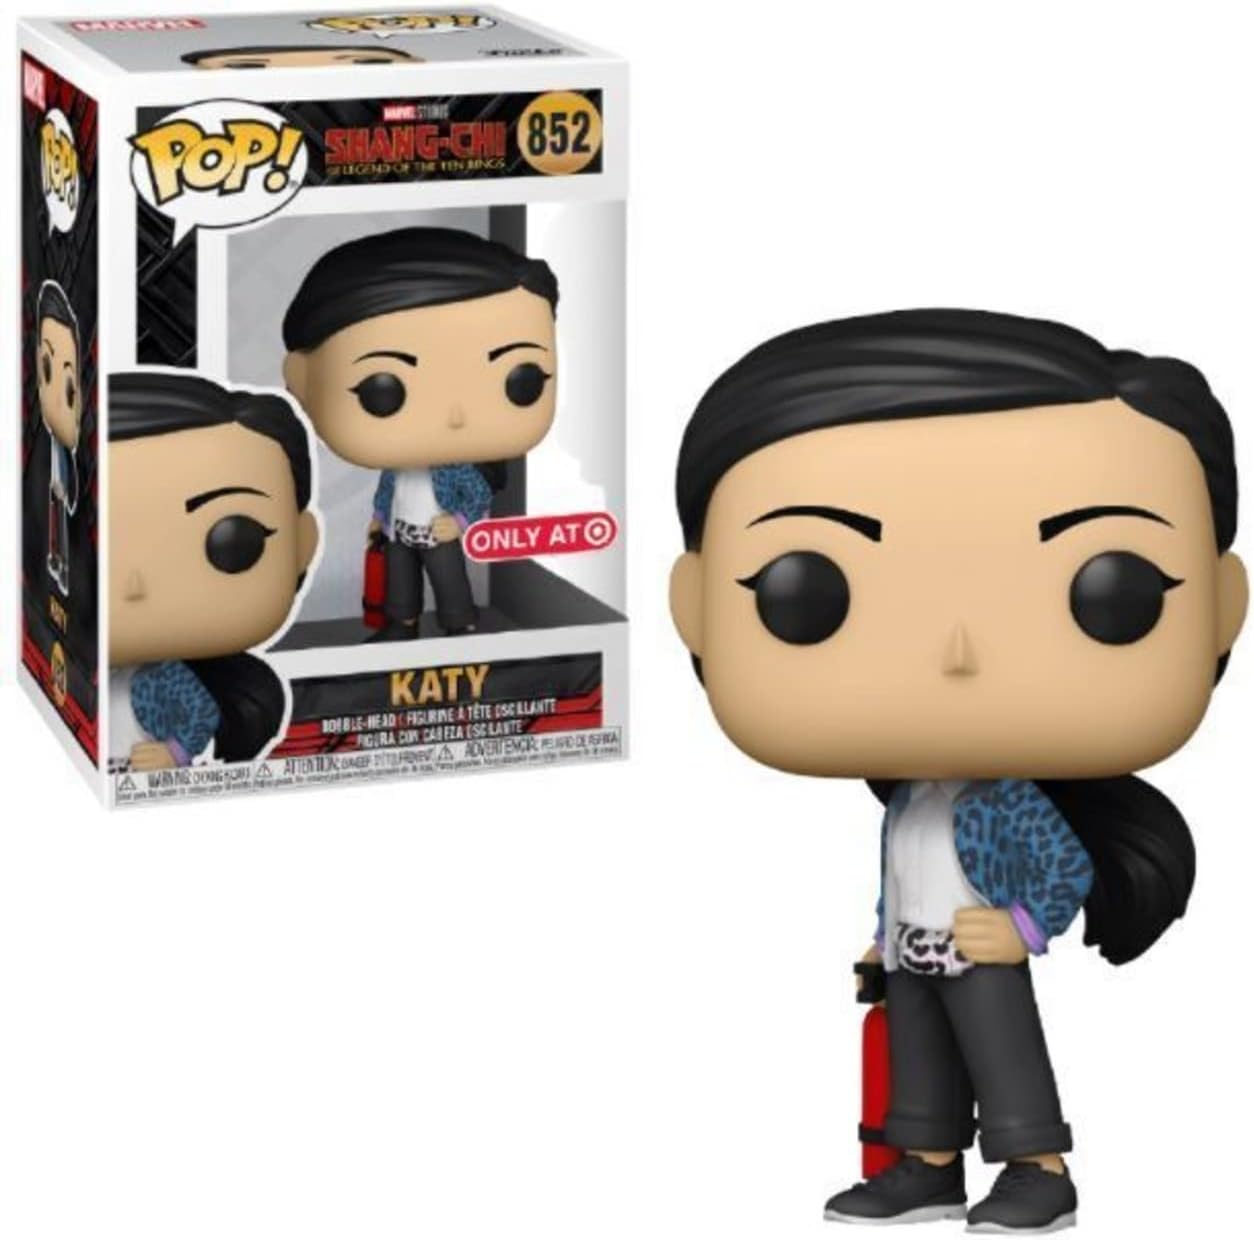 POP! Movies: Shang-Chi – Katy with Fire Extinguisher Vinyl Figure